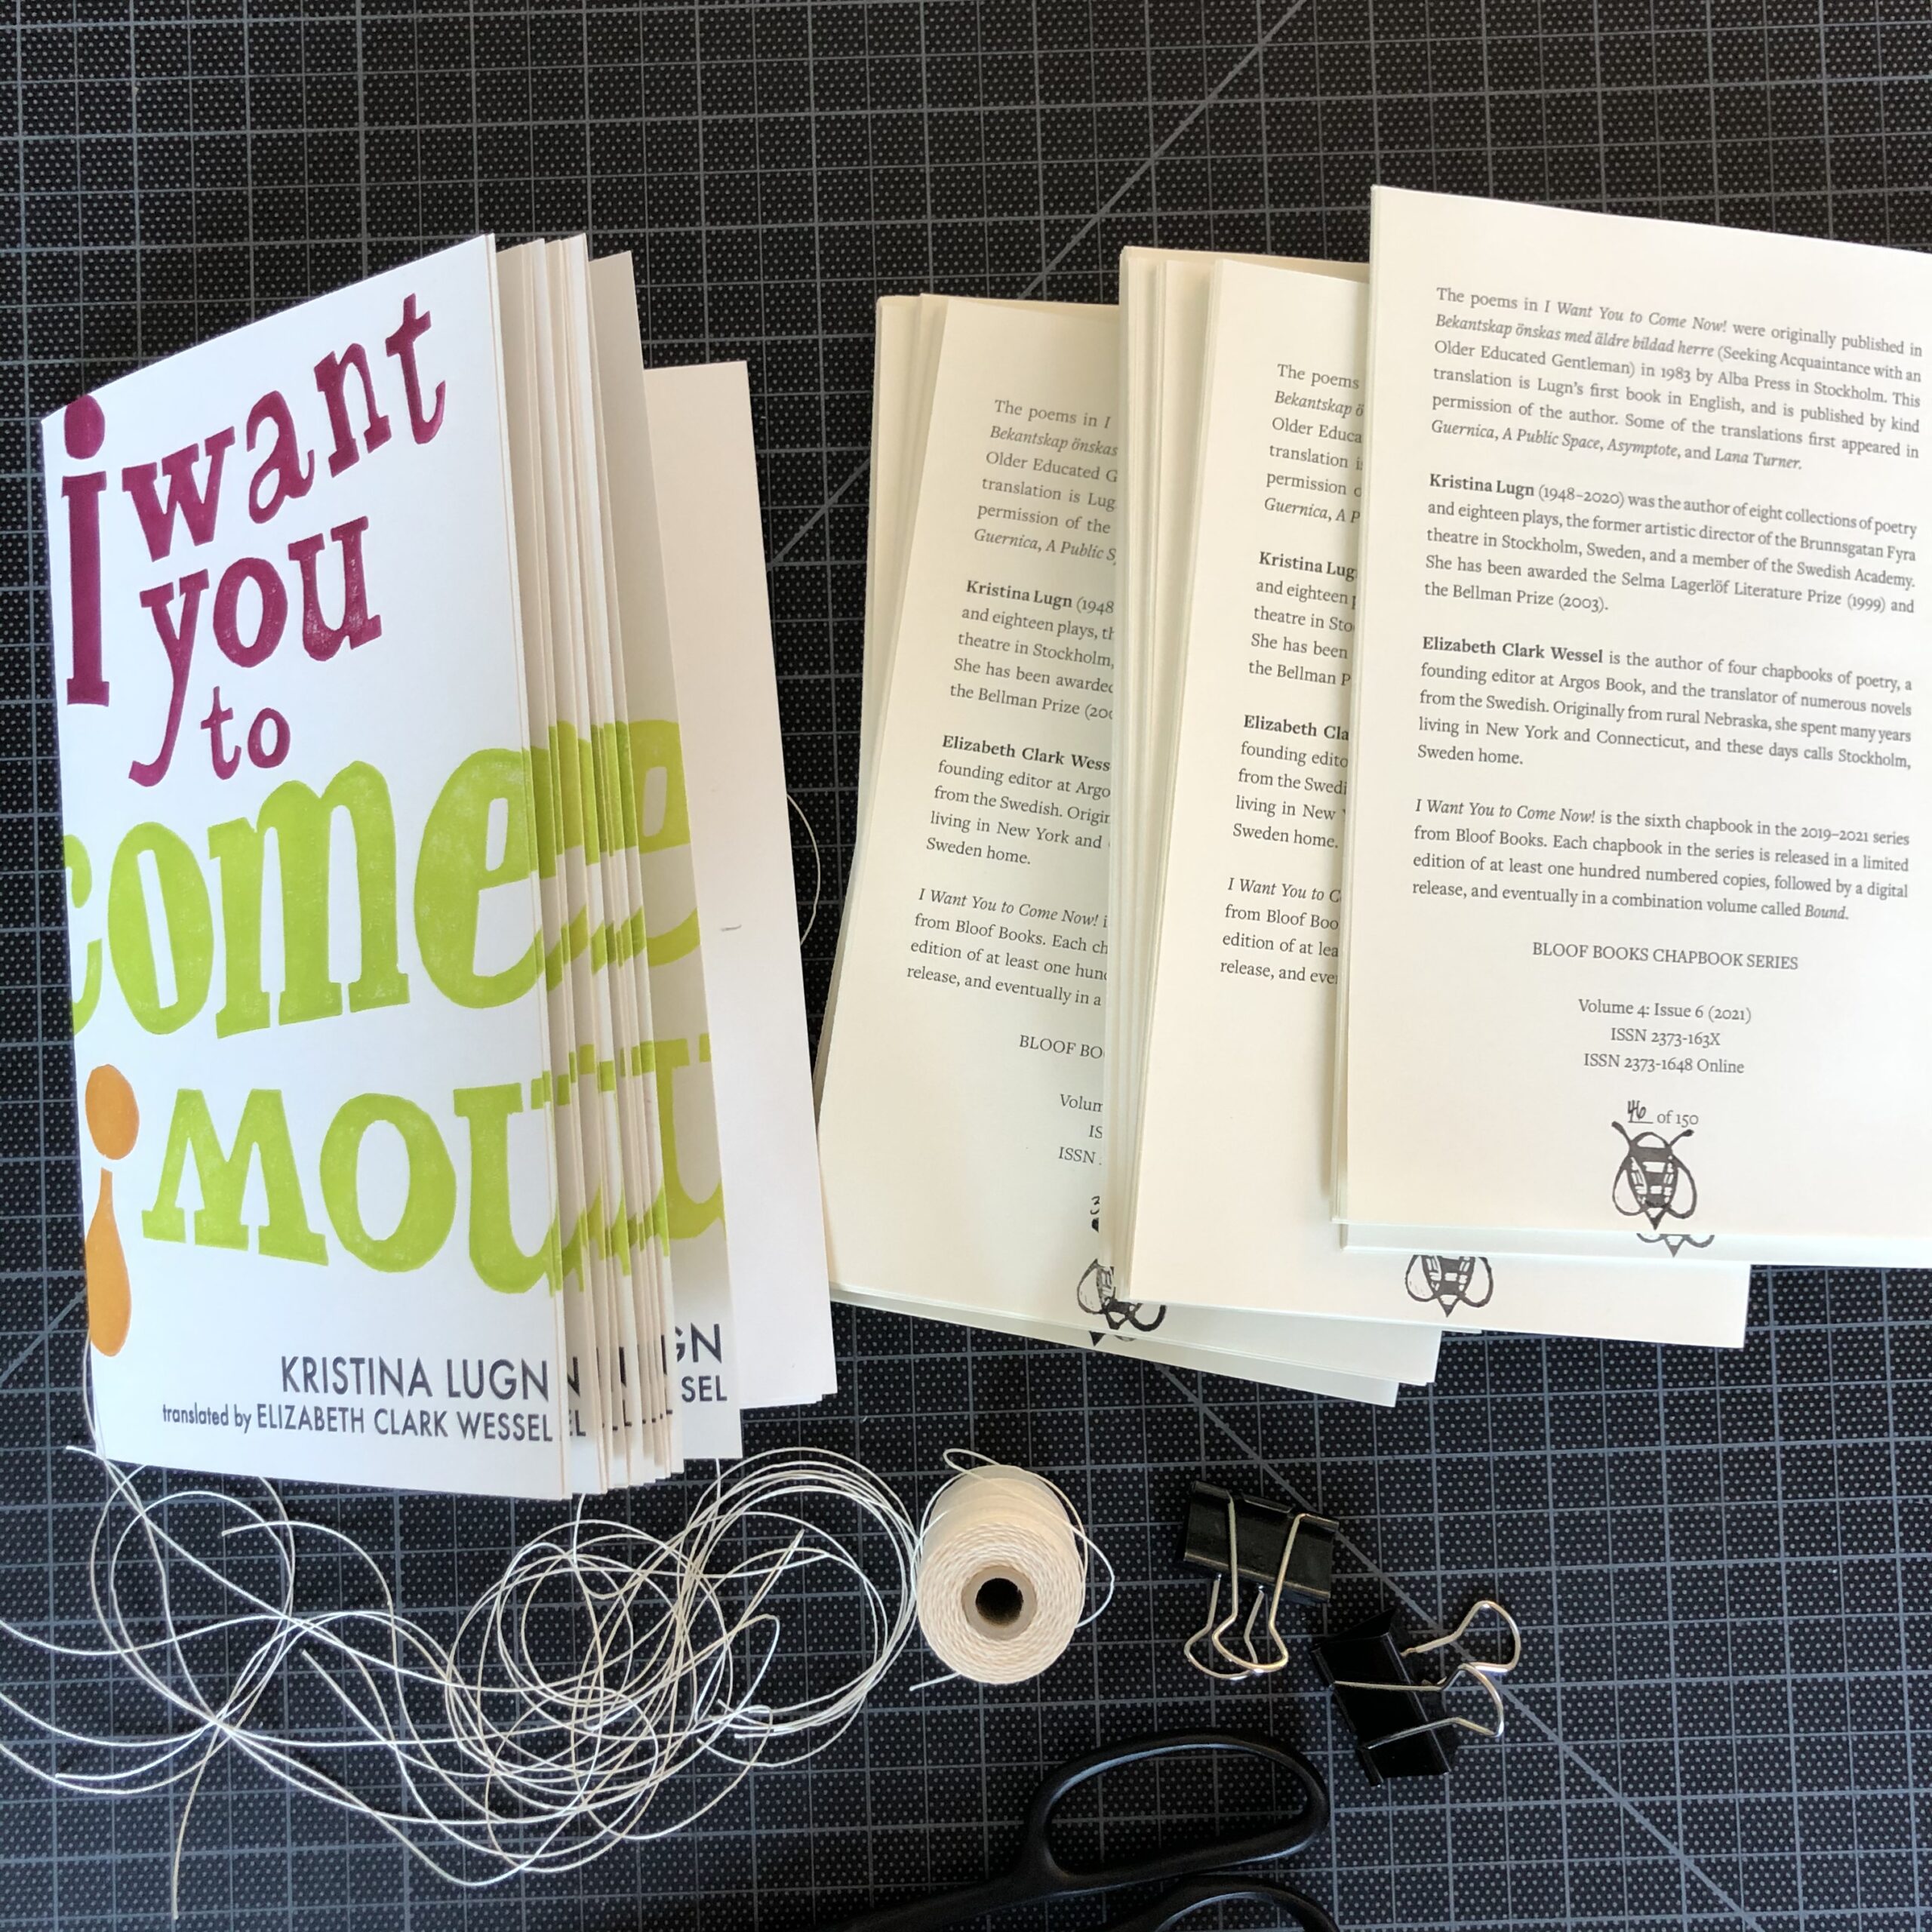 Copies of I Want You to Come Now! in progress. A stack of folded covers and a stack of folded interiors sit side by side on a black gridded cutting mat, with thread and binder clips